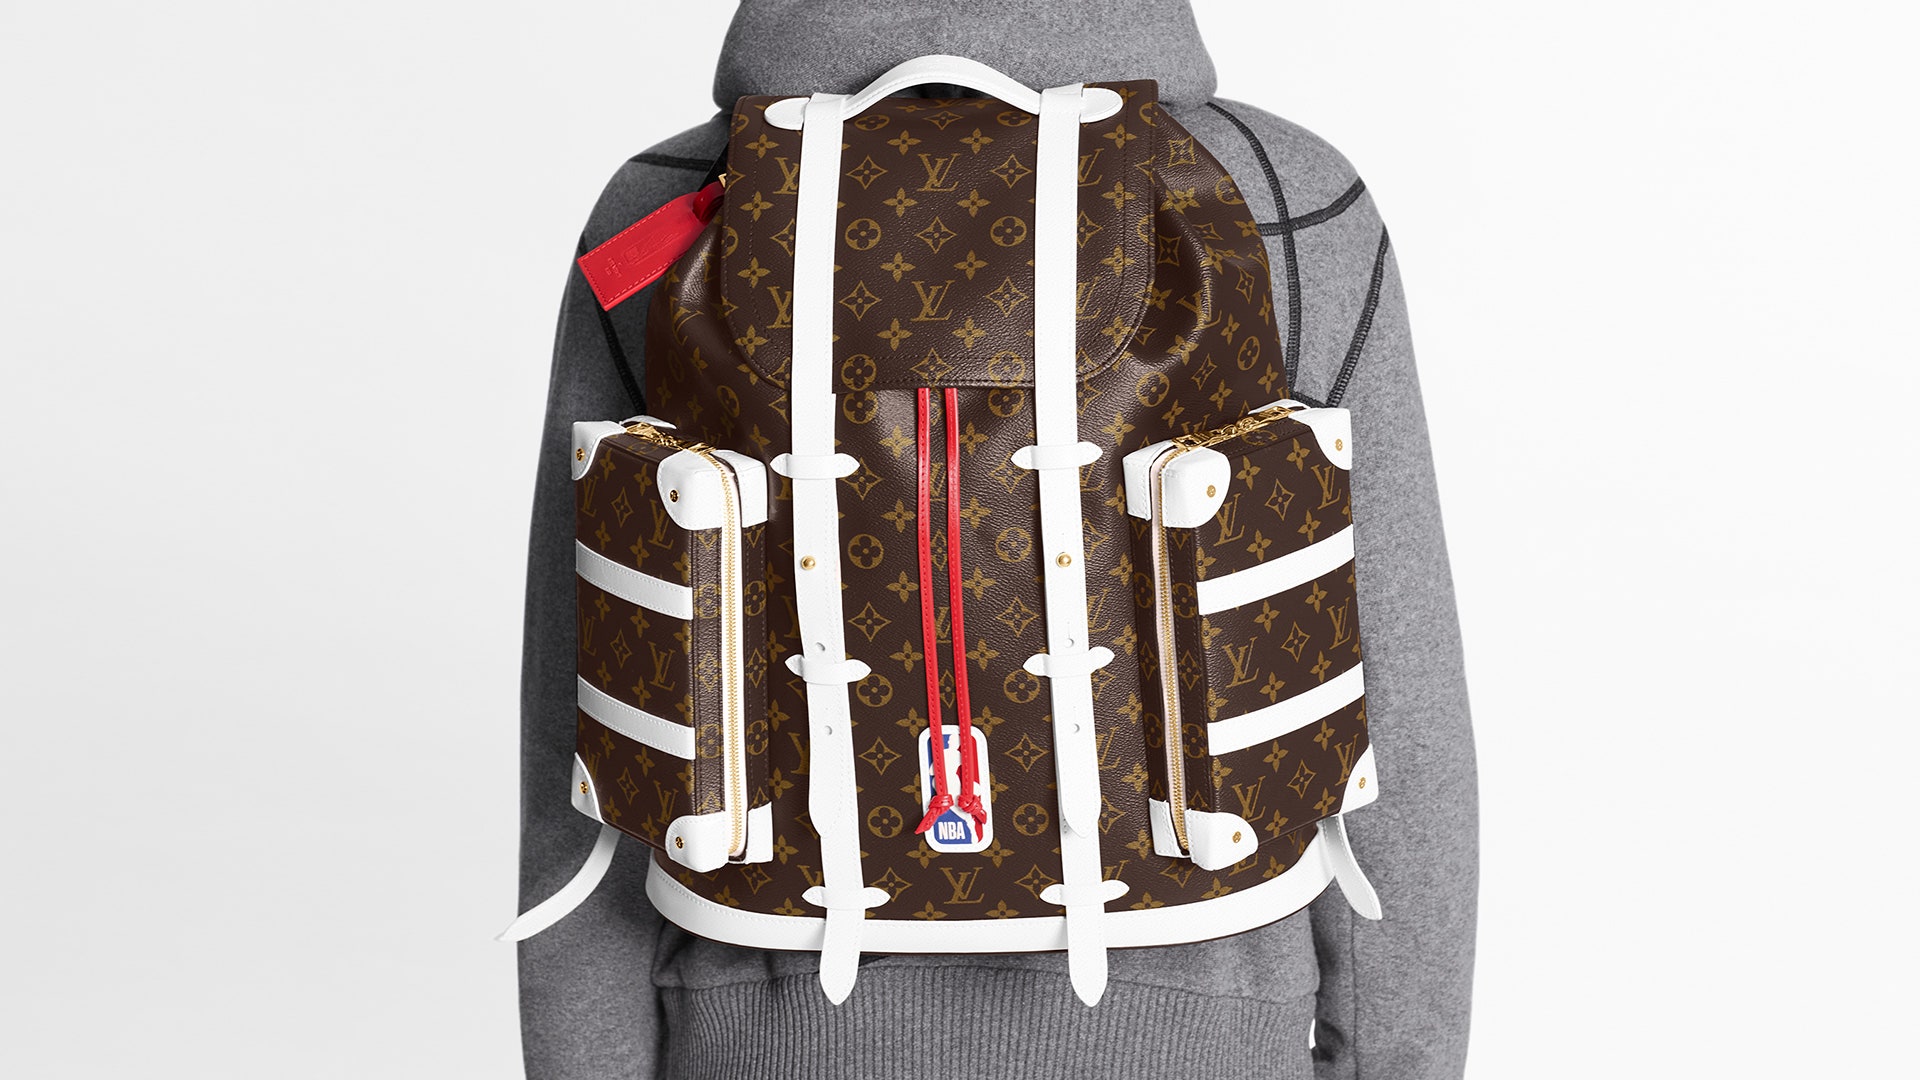 Channel LeBron James with the Louis Vuitton x NBA collection - www.semashow.com